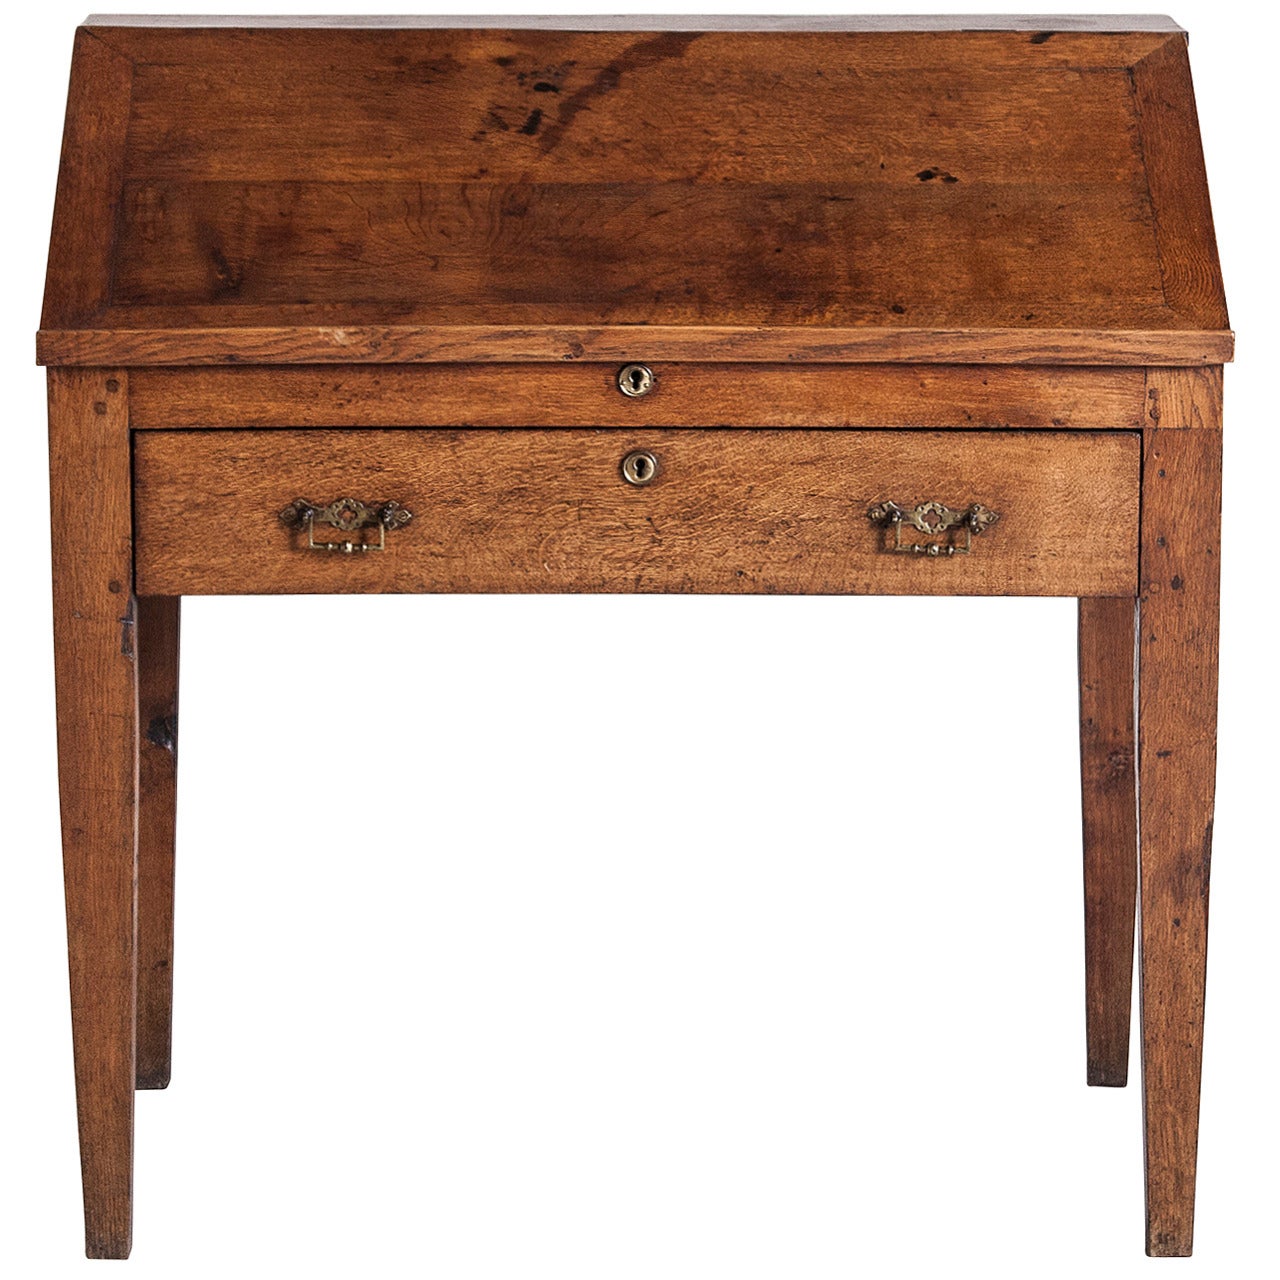 Early 19th Century French Rustic Oak Notary or Drafting Desk from Burgundy